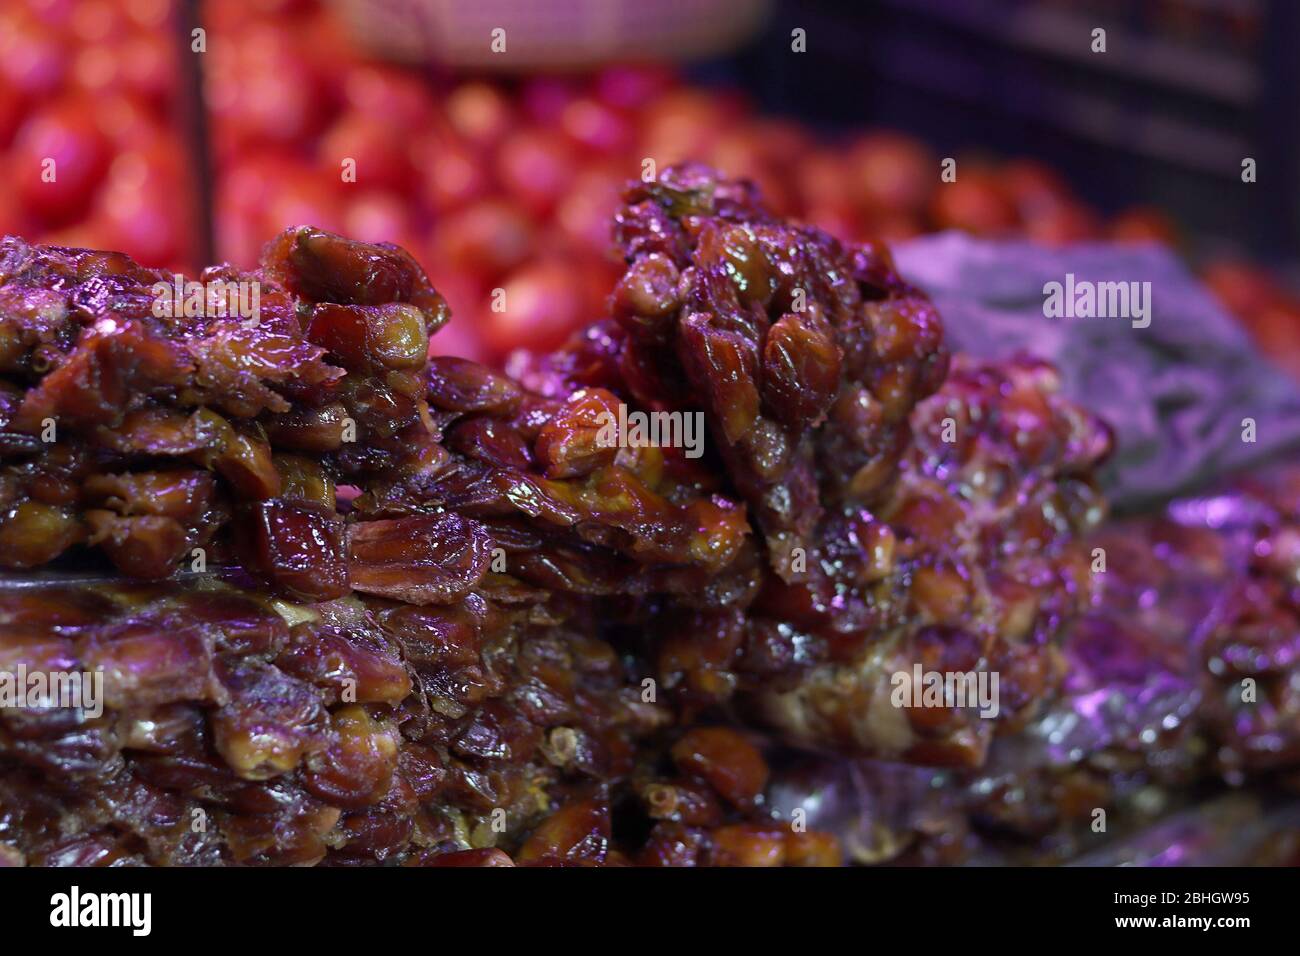 Date fruit in market for sale Stock Photo